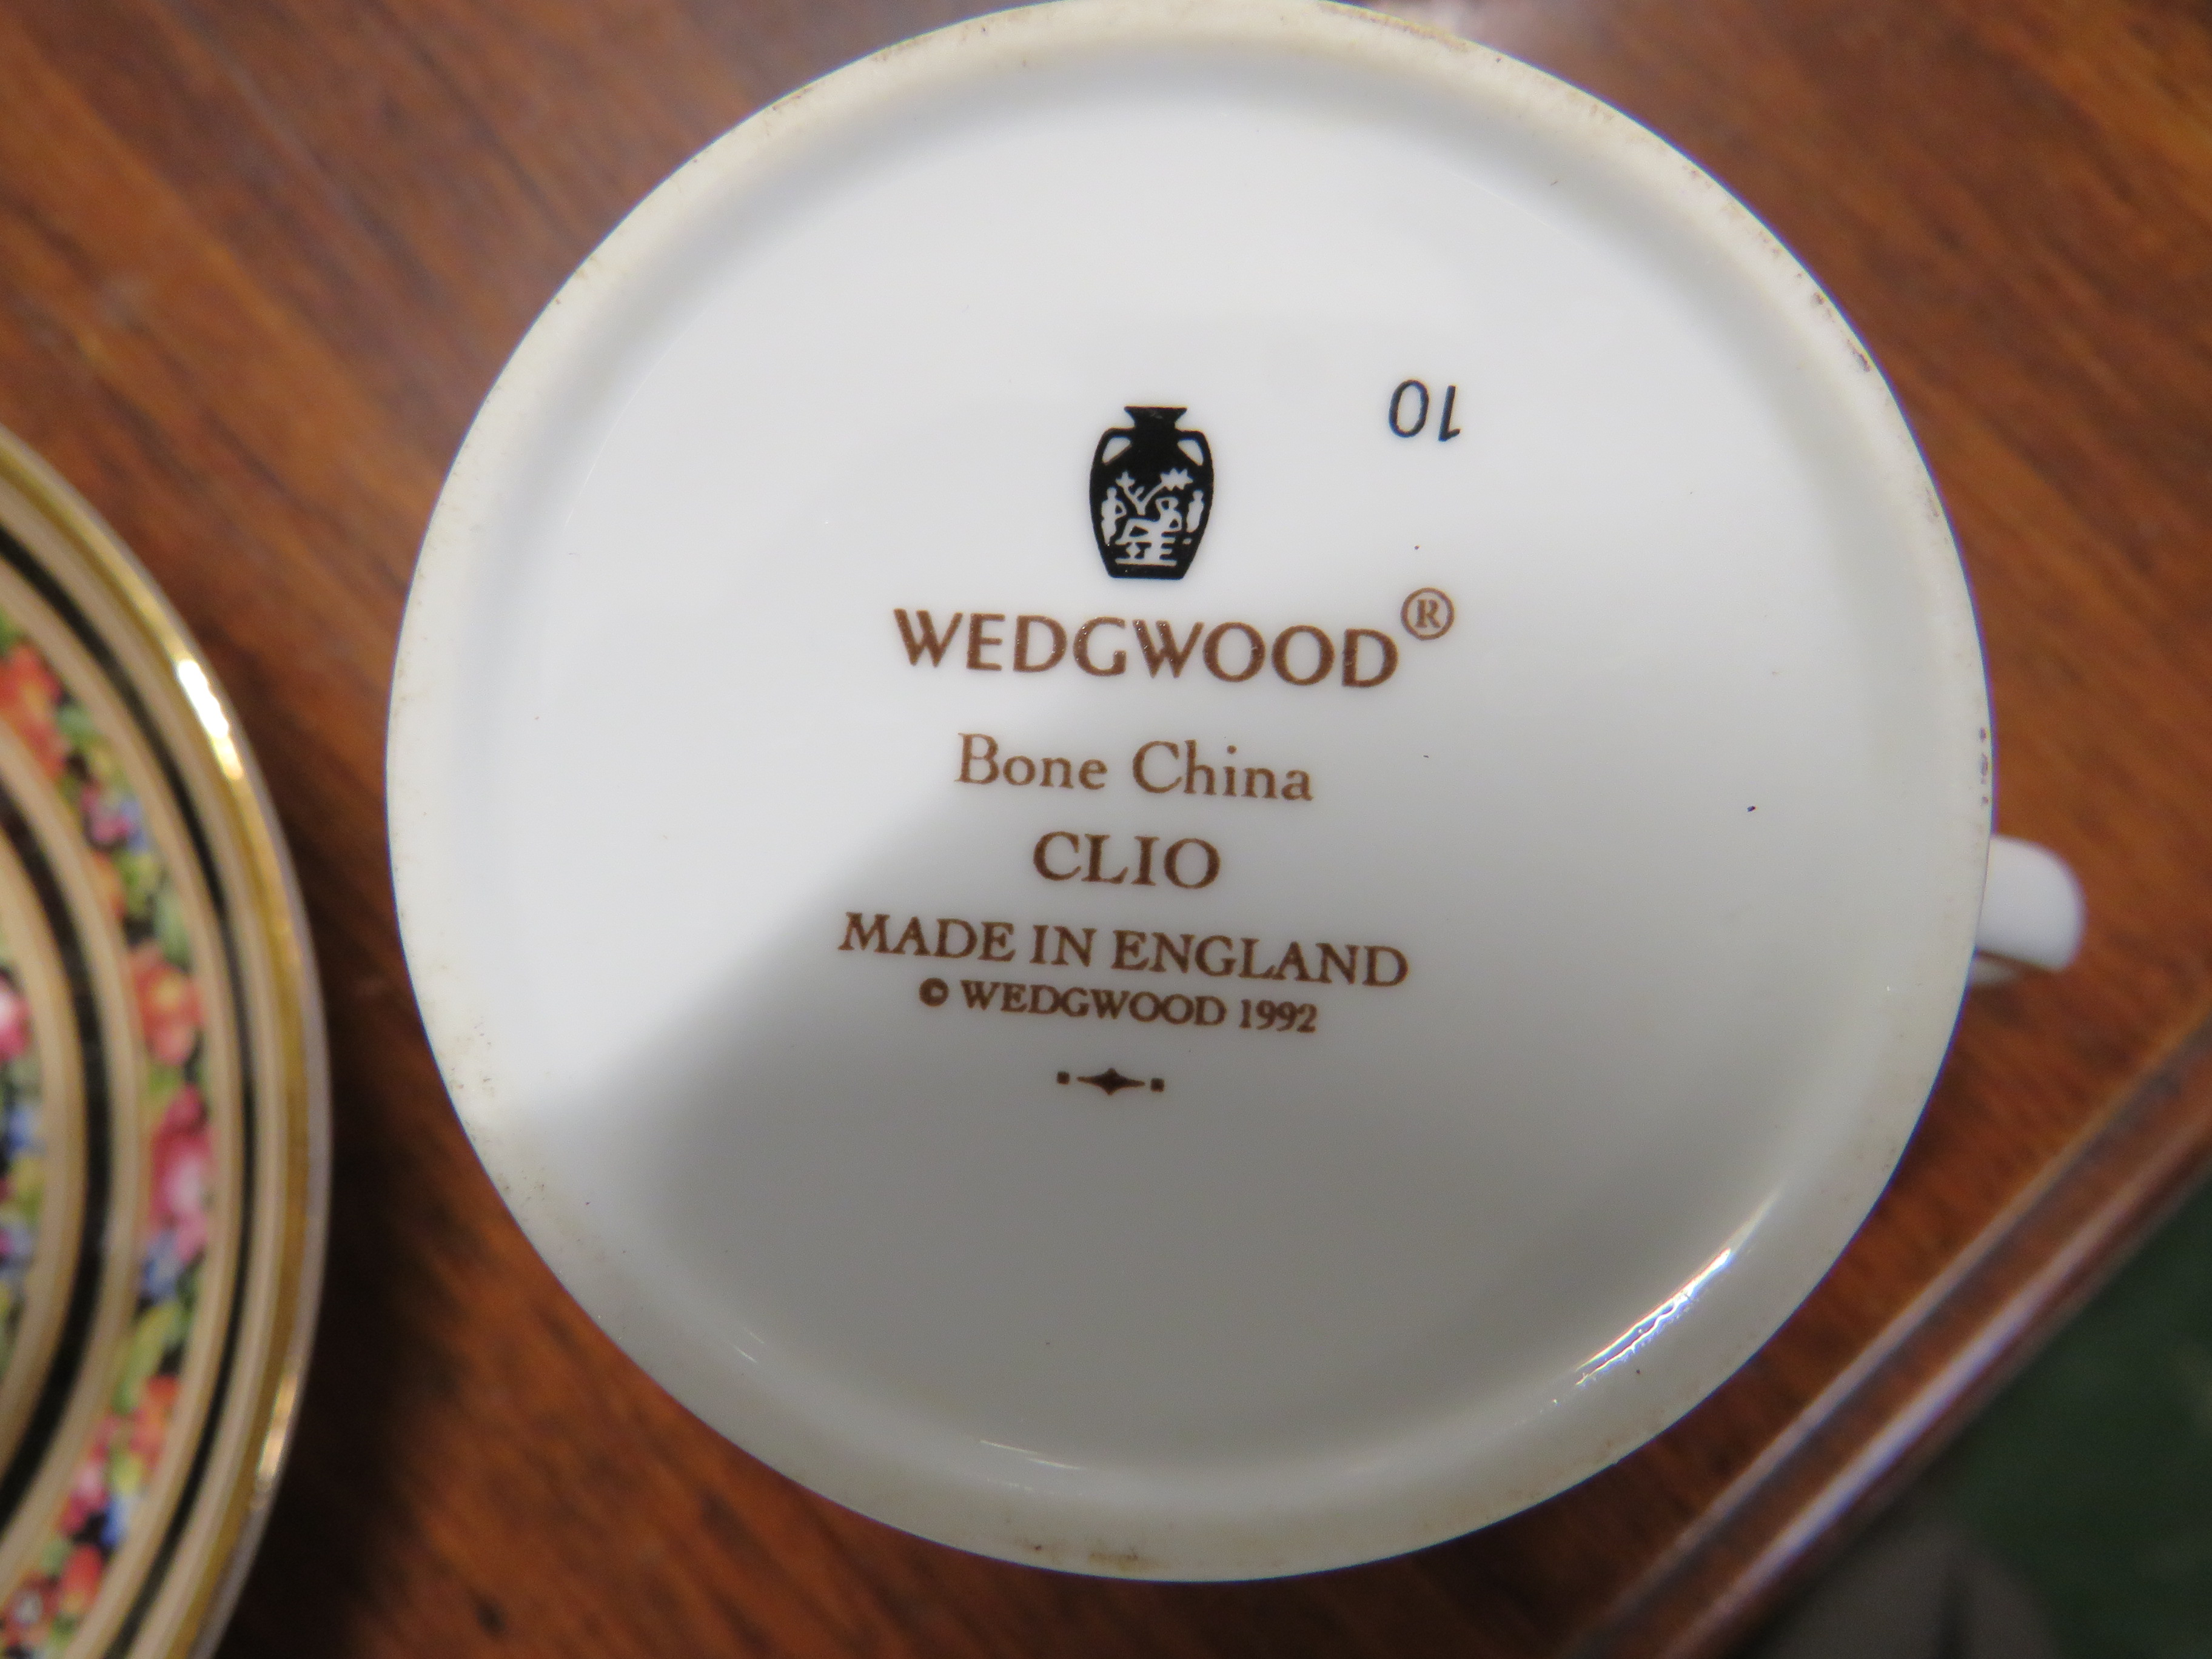 WEDGWOOD 'CLIO' MANTLE CLOCK, DINNER PLATES, SIDE PLATES AND SIX COFFEE CUPS AND SAUCERS - Image 2 of 2